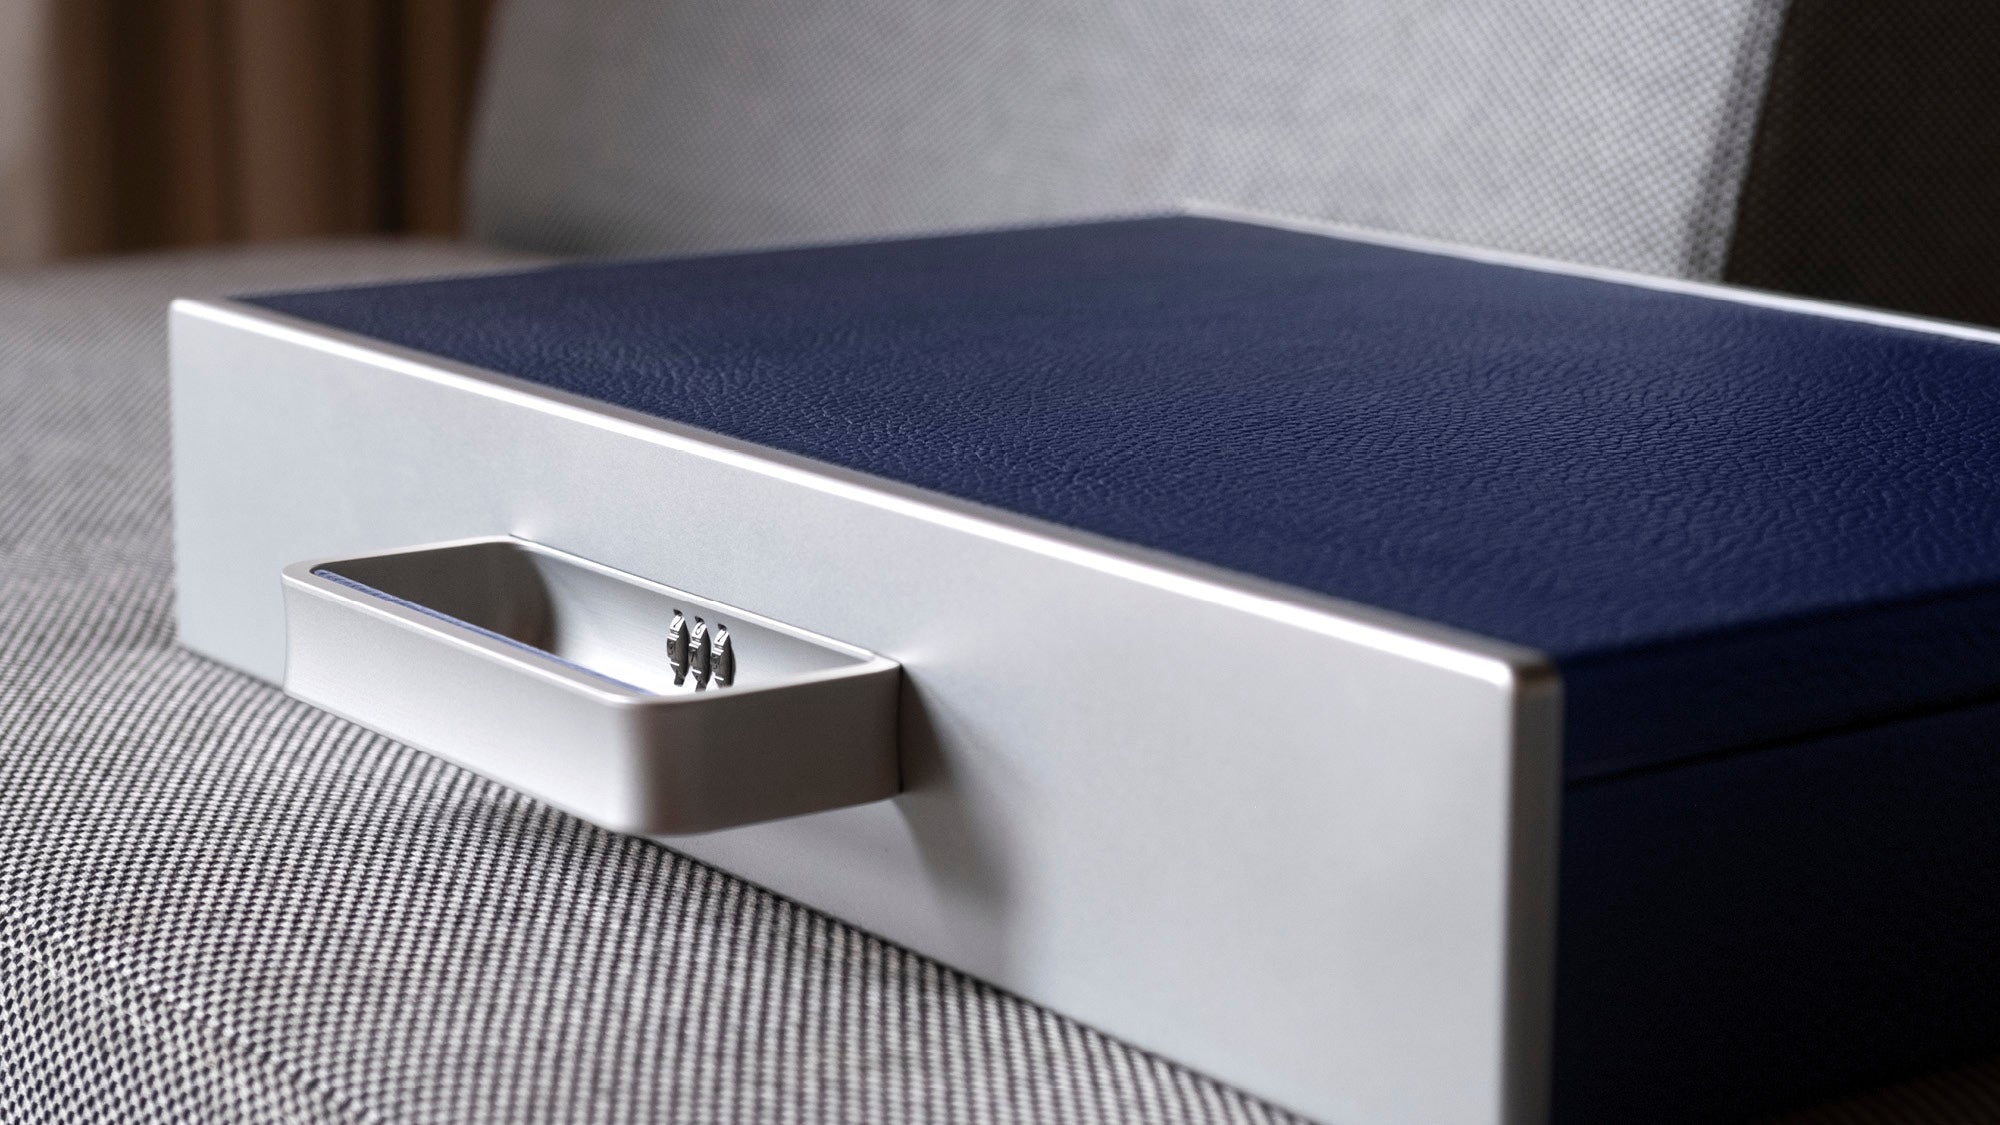 Detail photo of Mackenzie Briefcase in grey carbon fiber and anodized aluminum and sapphire leather